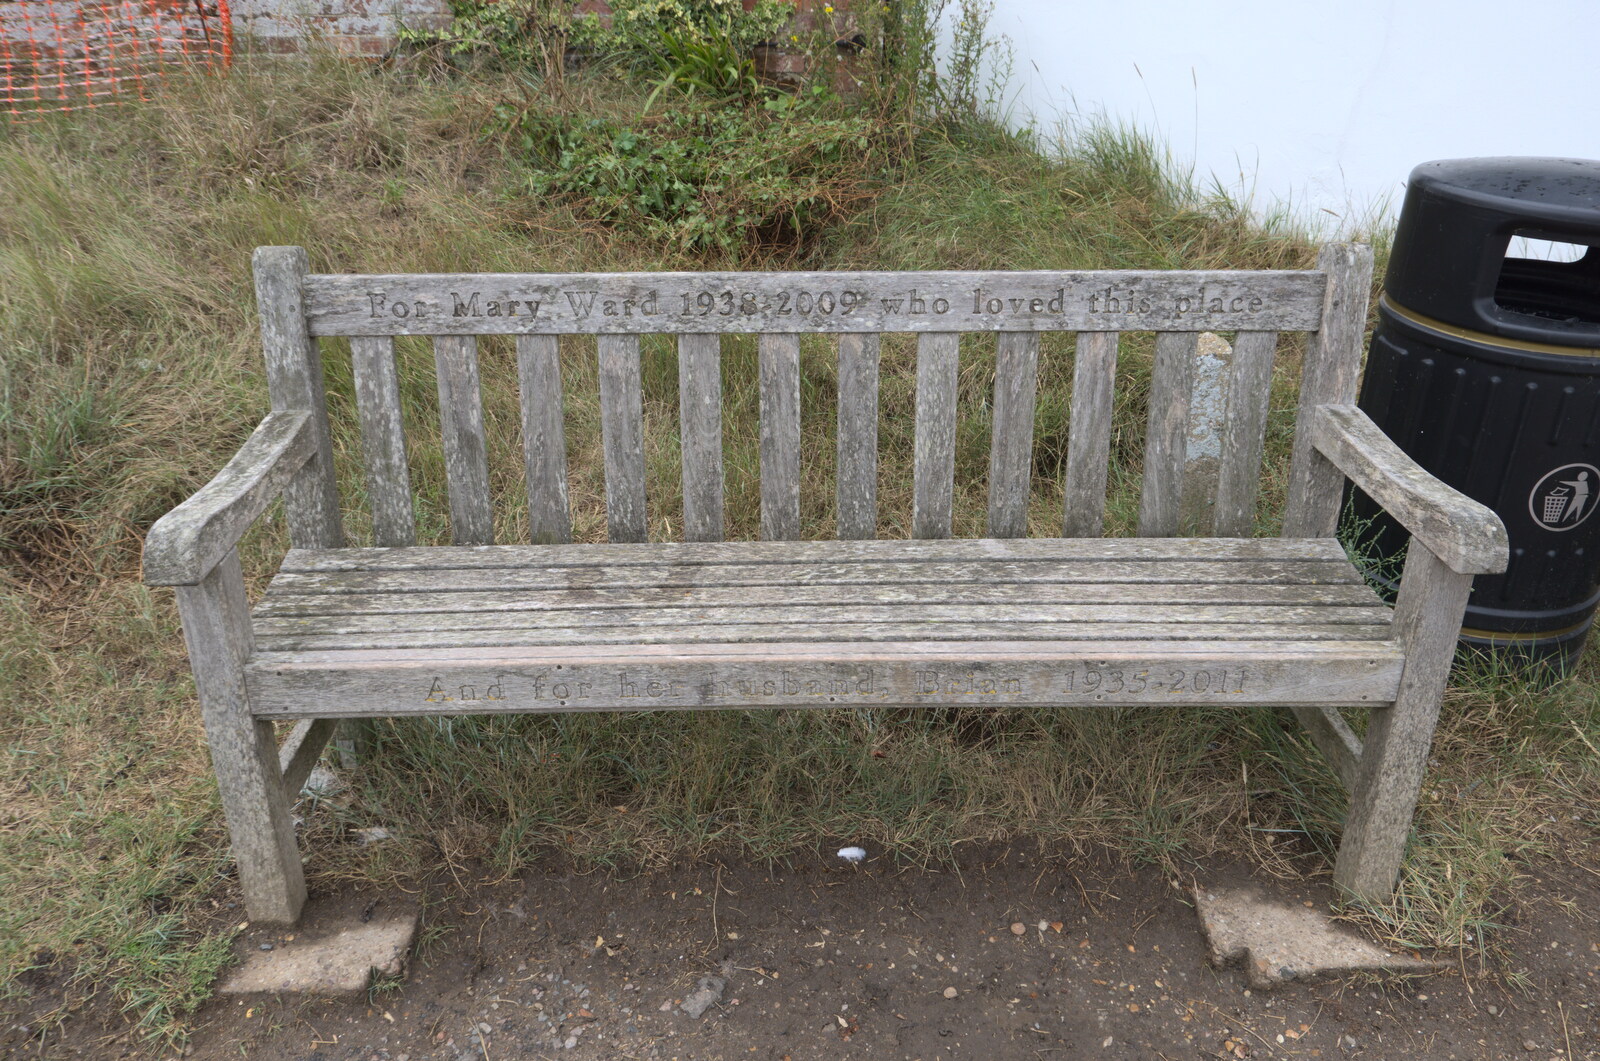 A memorial bench from A Trip to Orford, Suffolk - 29th August 2020